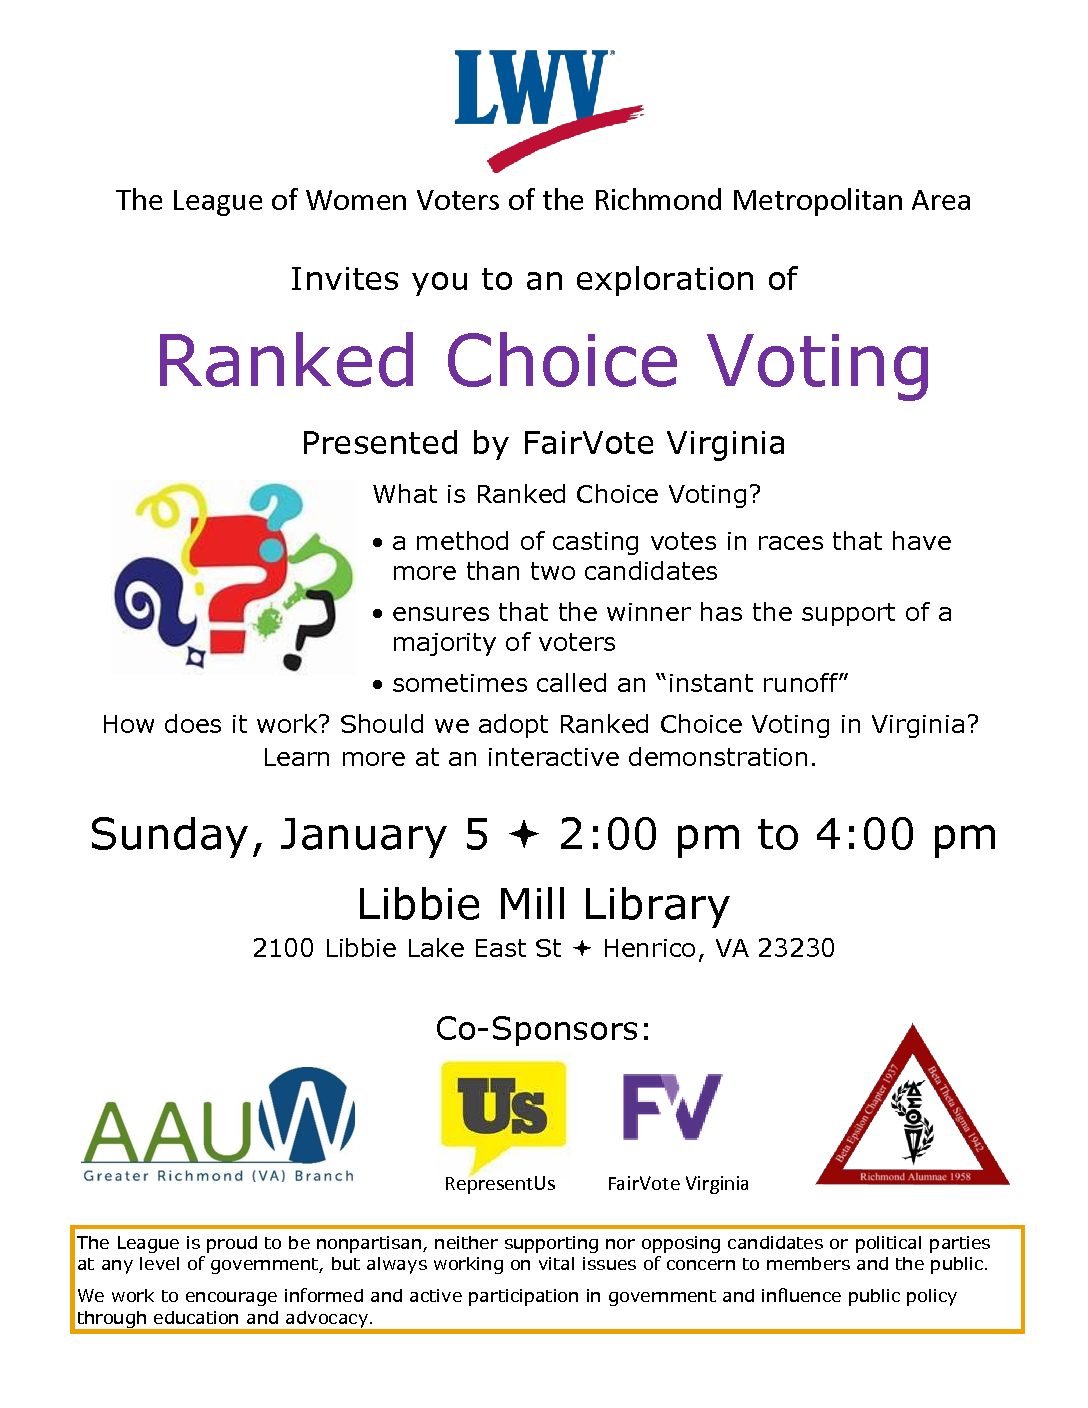 The Educated Voter: Ranked Choice Voting